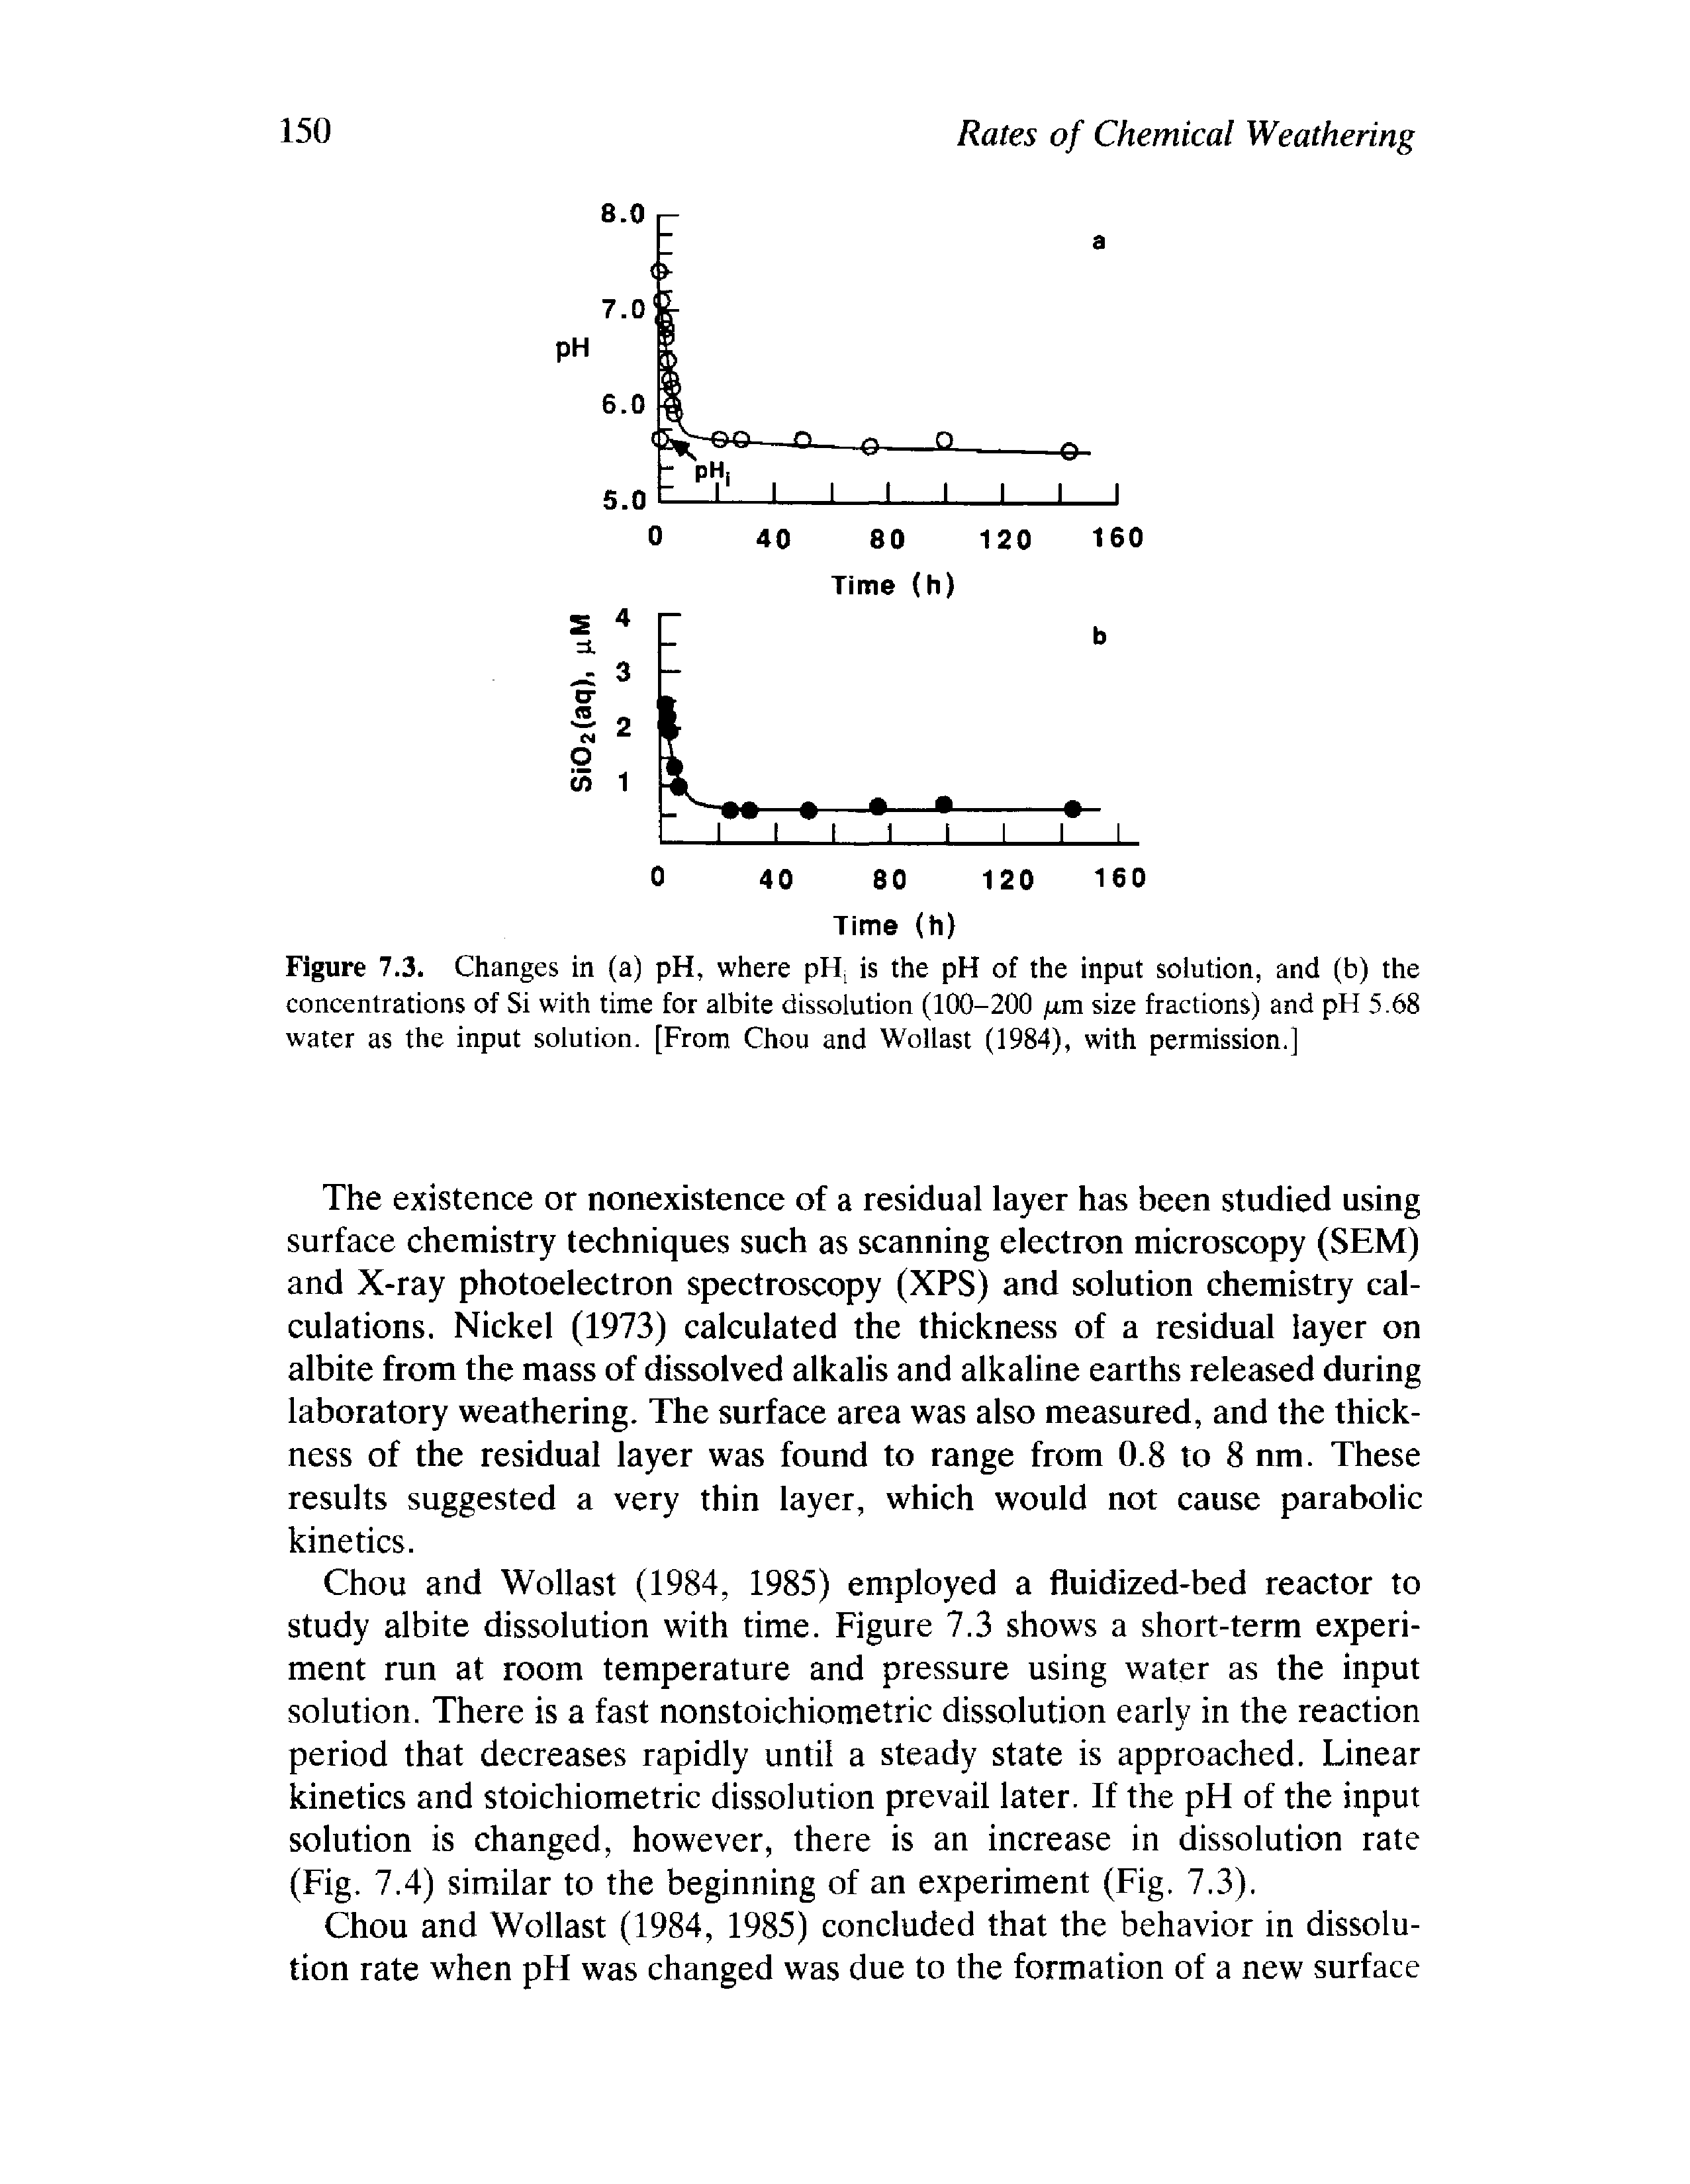 Figure 7.3. Changes in (a) pH, where pH is the pH of the input solution, and (b) the concentrations of Si with time for albite dissolution (100-200 ju.m size fractions) and pH 5.68 water as the input solution. [From Chou and Wollast (1984), with permission.]...